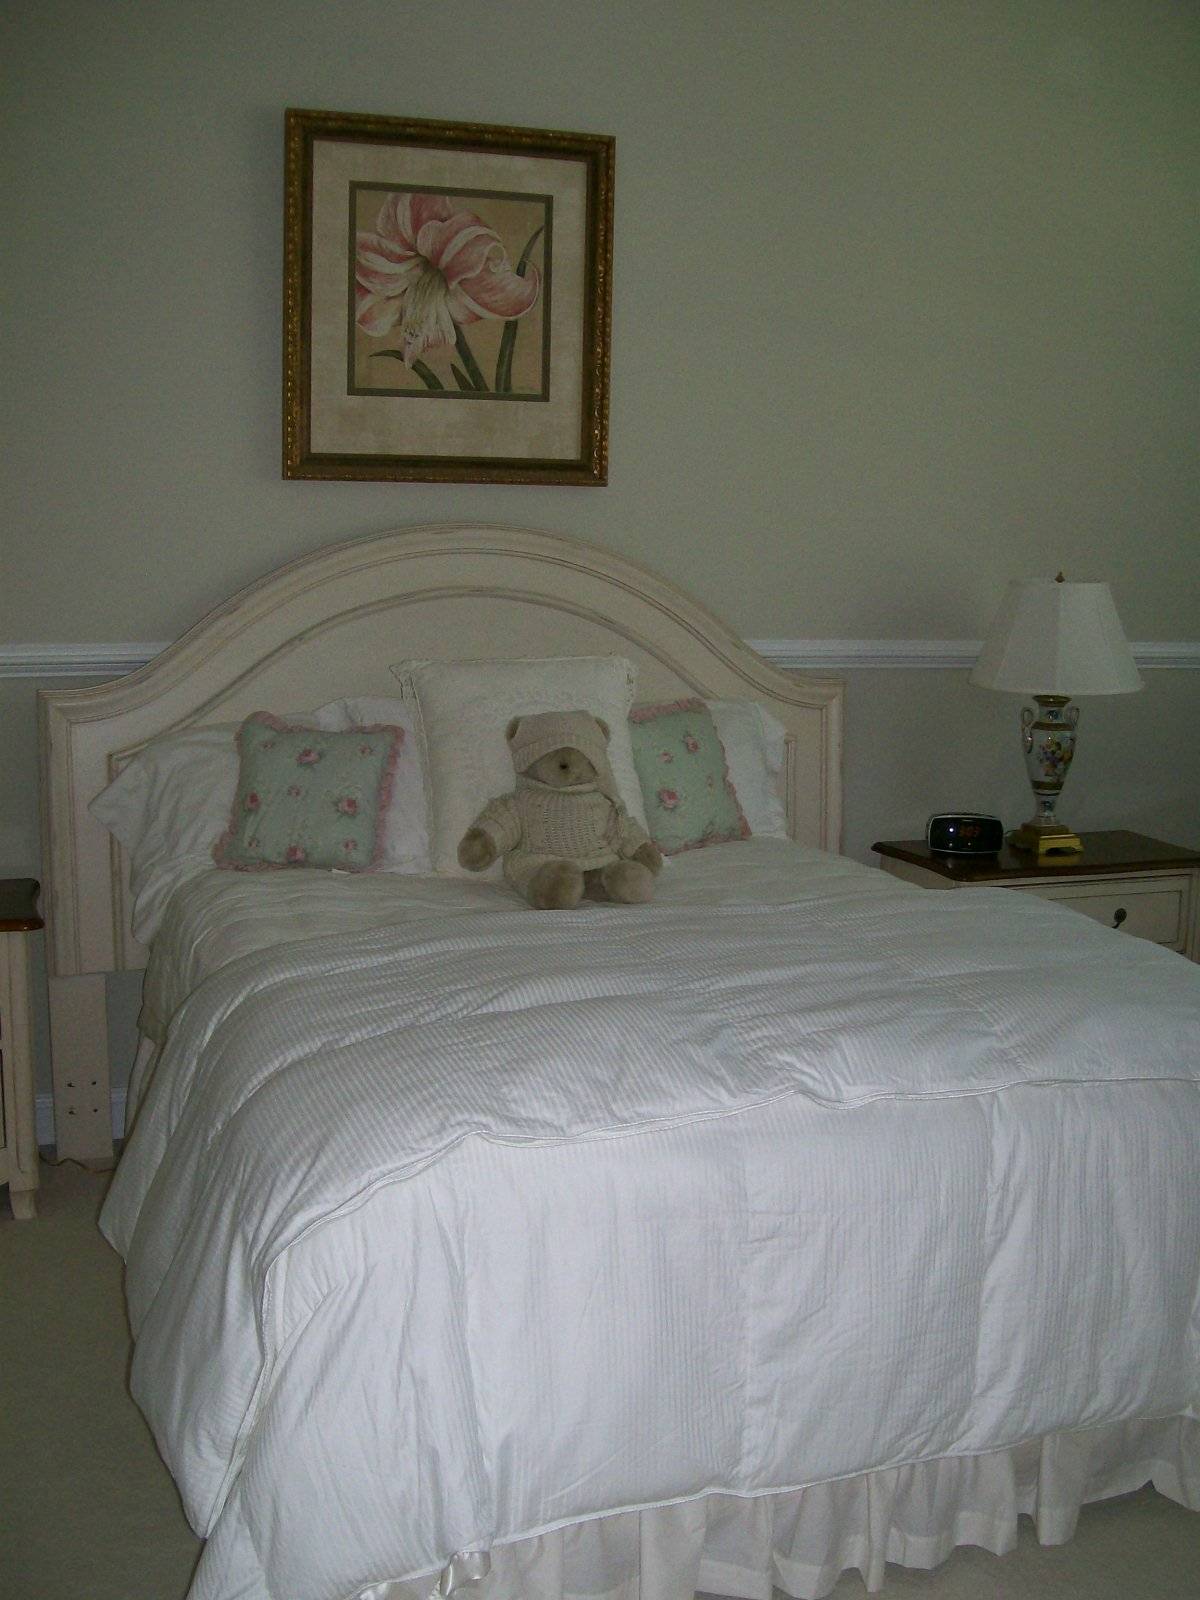 QUEEN OR FULL HEAD BOARD MATTRESS BOXSPRING AND FRAME. FRAMED ARTWORK